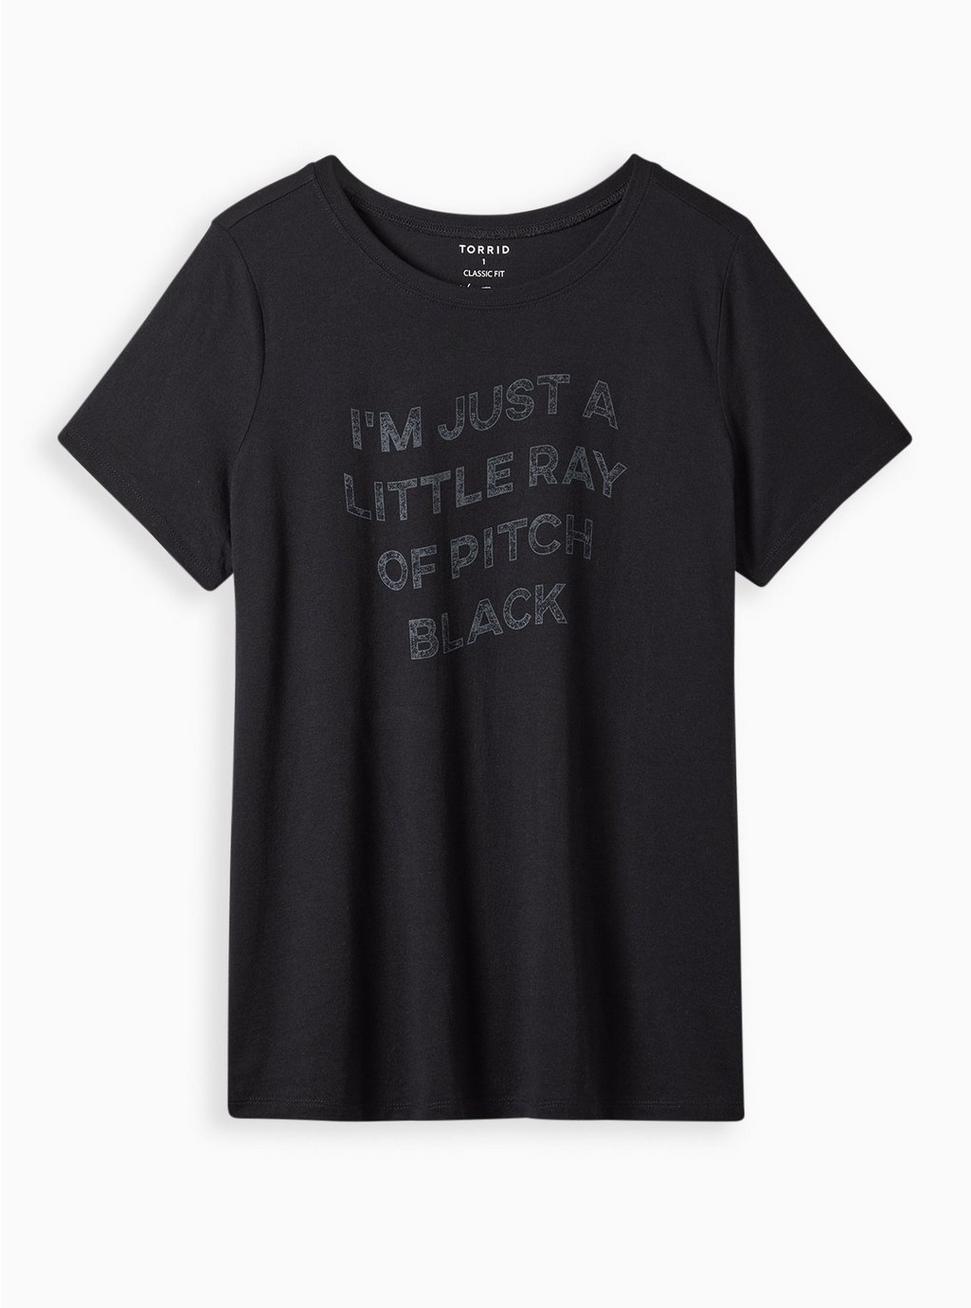 Plus Size - Everyday Tee - Signature Jersey Ray Of Pitch Black - Torrid